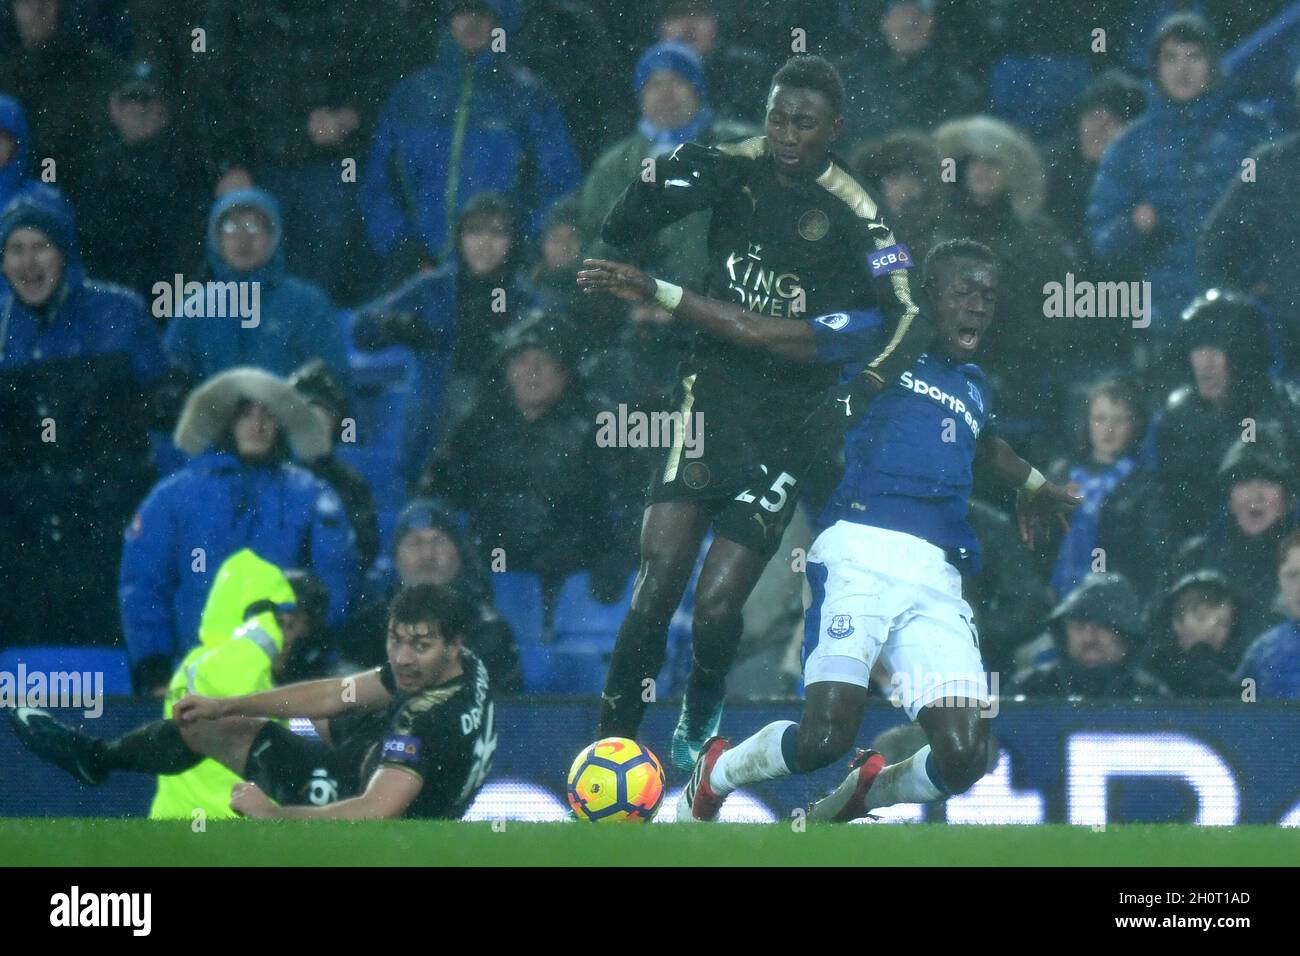 Everton's Idrissa Gueye is tackled by Leicester City's Wilfred Ndidi Stock Photo